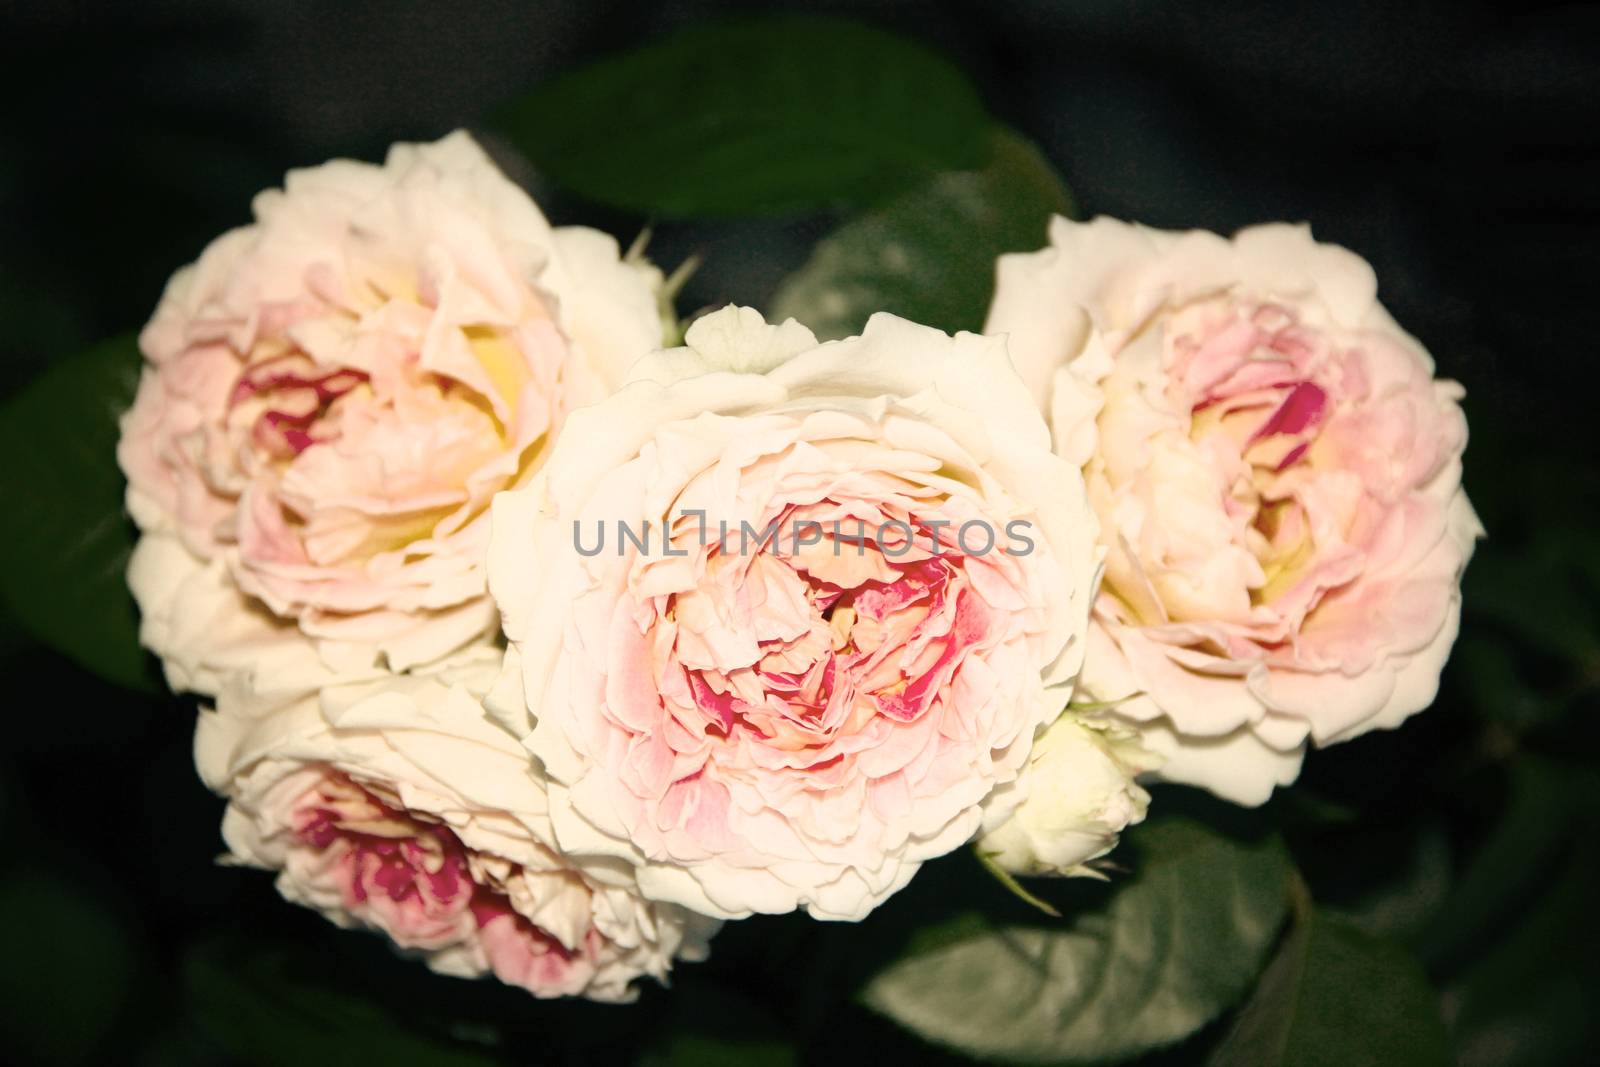 biautiful white and pink rose. photo. flowers spring background